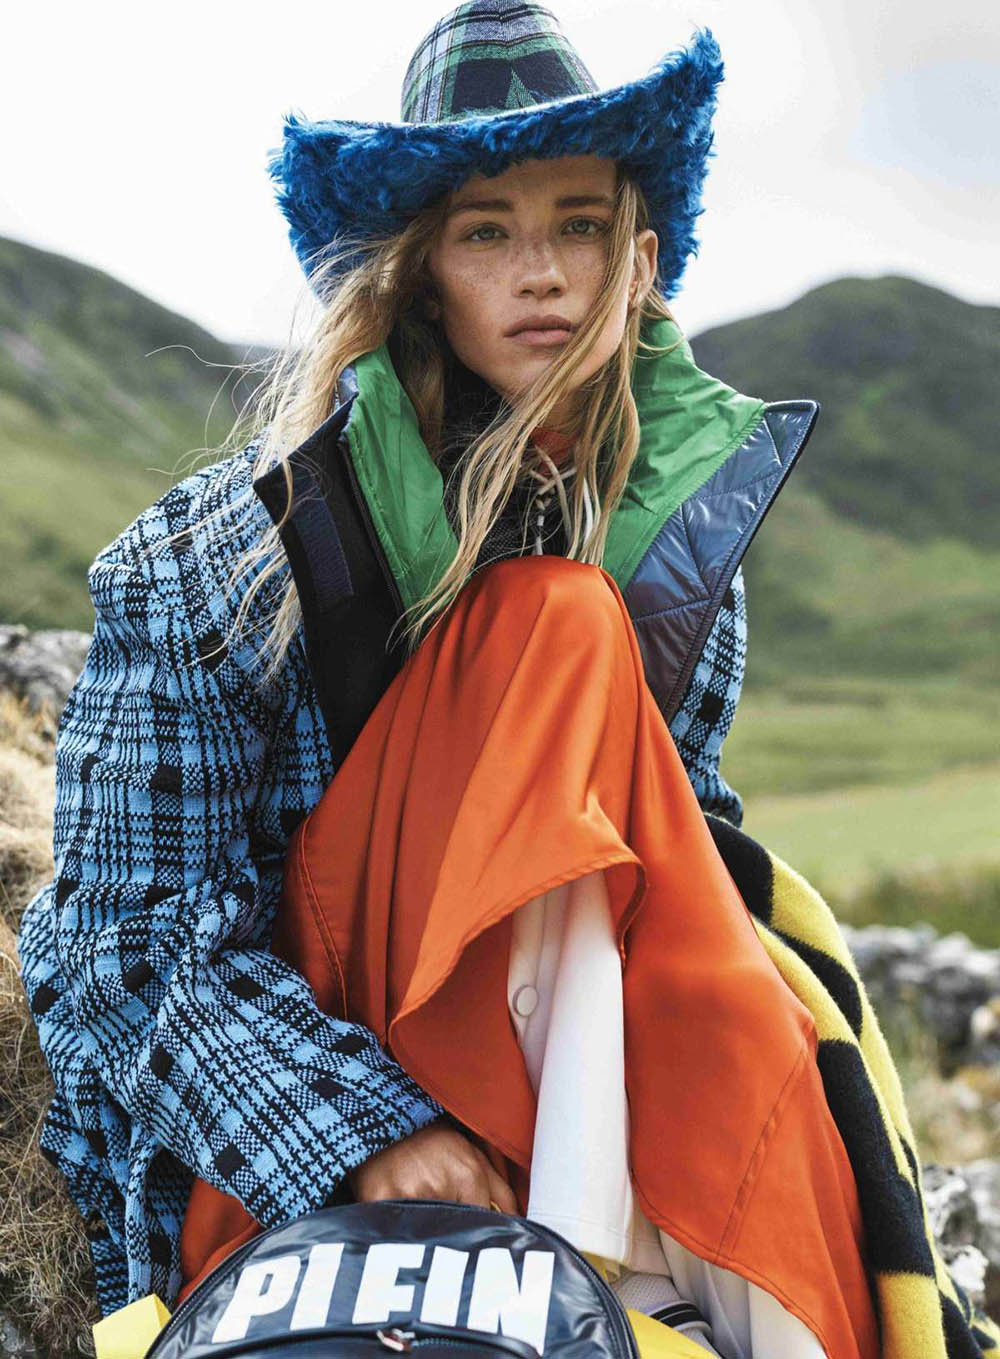 ''Clash of the Tartans'' by Josh Olins for Vogue US October 2018